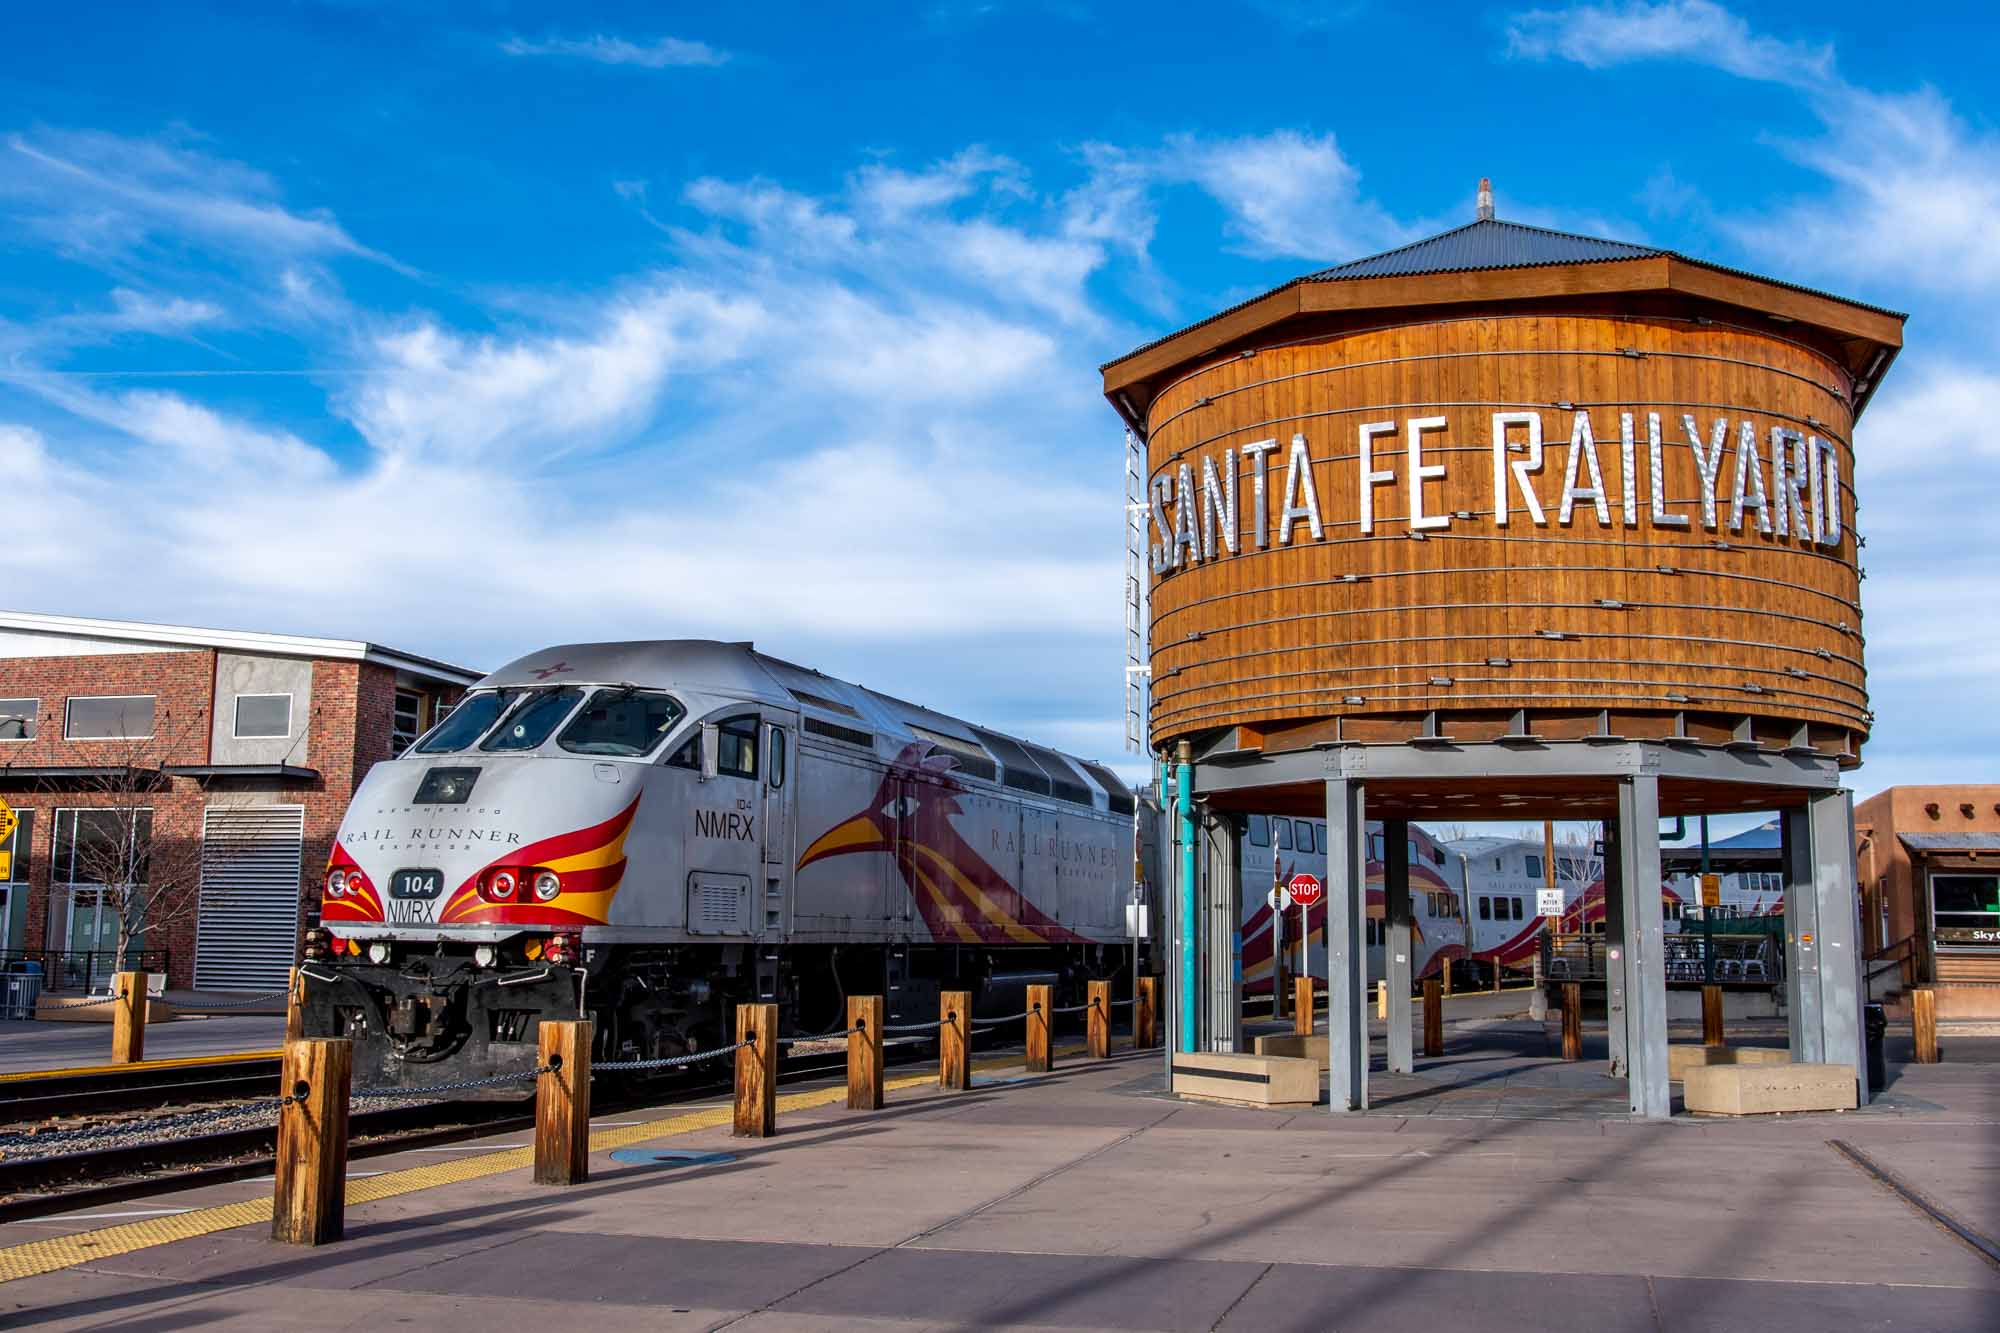 Round water tower labeled "Santa Fe Railyard" next to a gray train